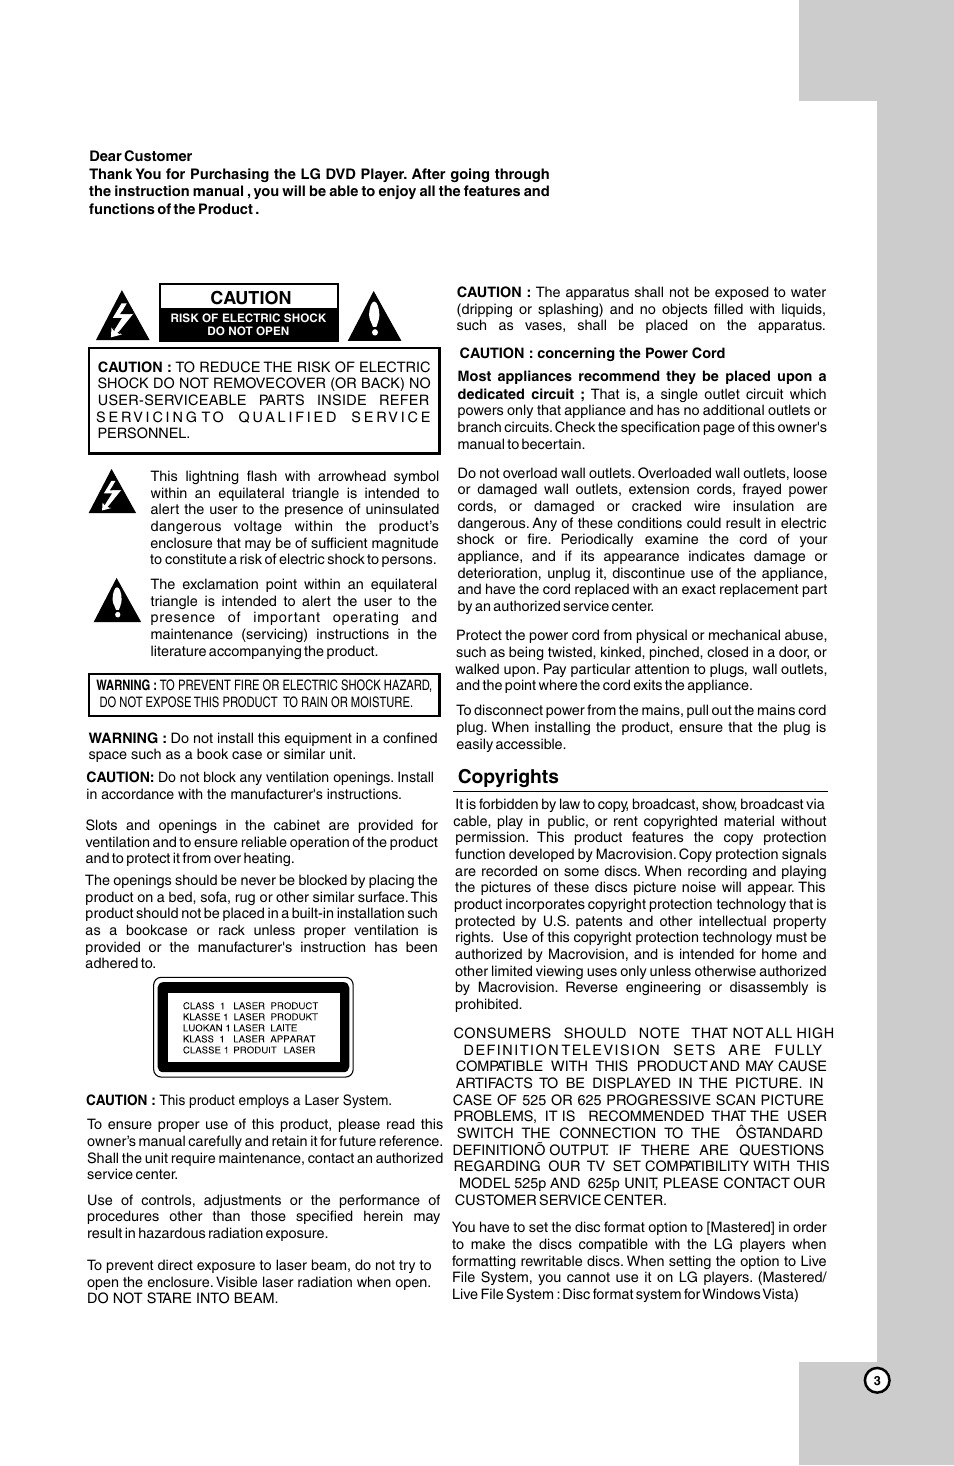 Copyrights, Caution | LG HT924SF User Manual | Page 3 / 24